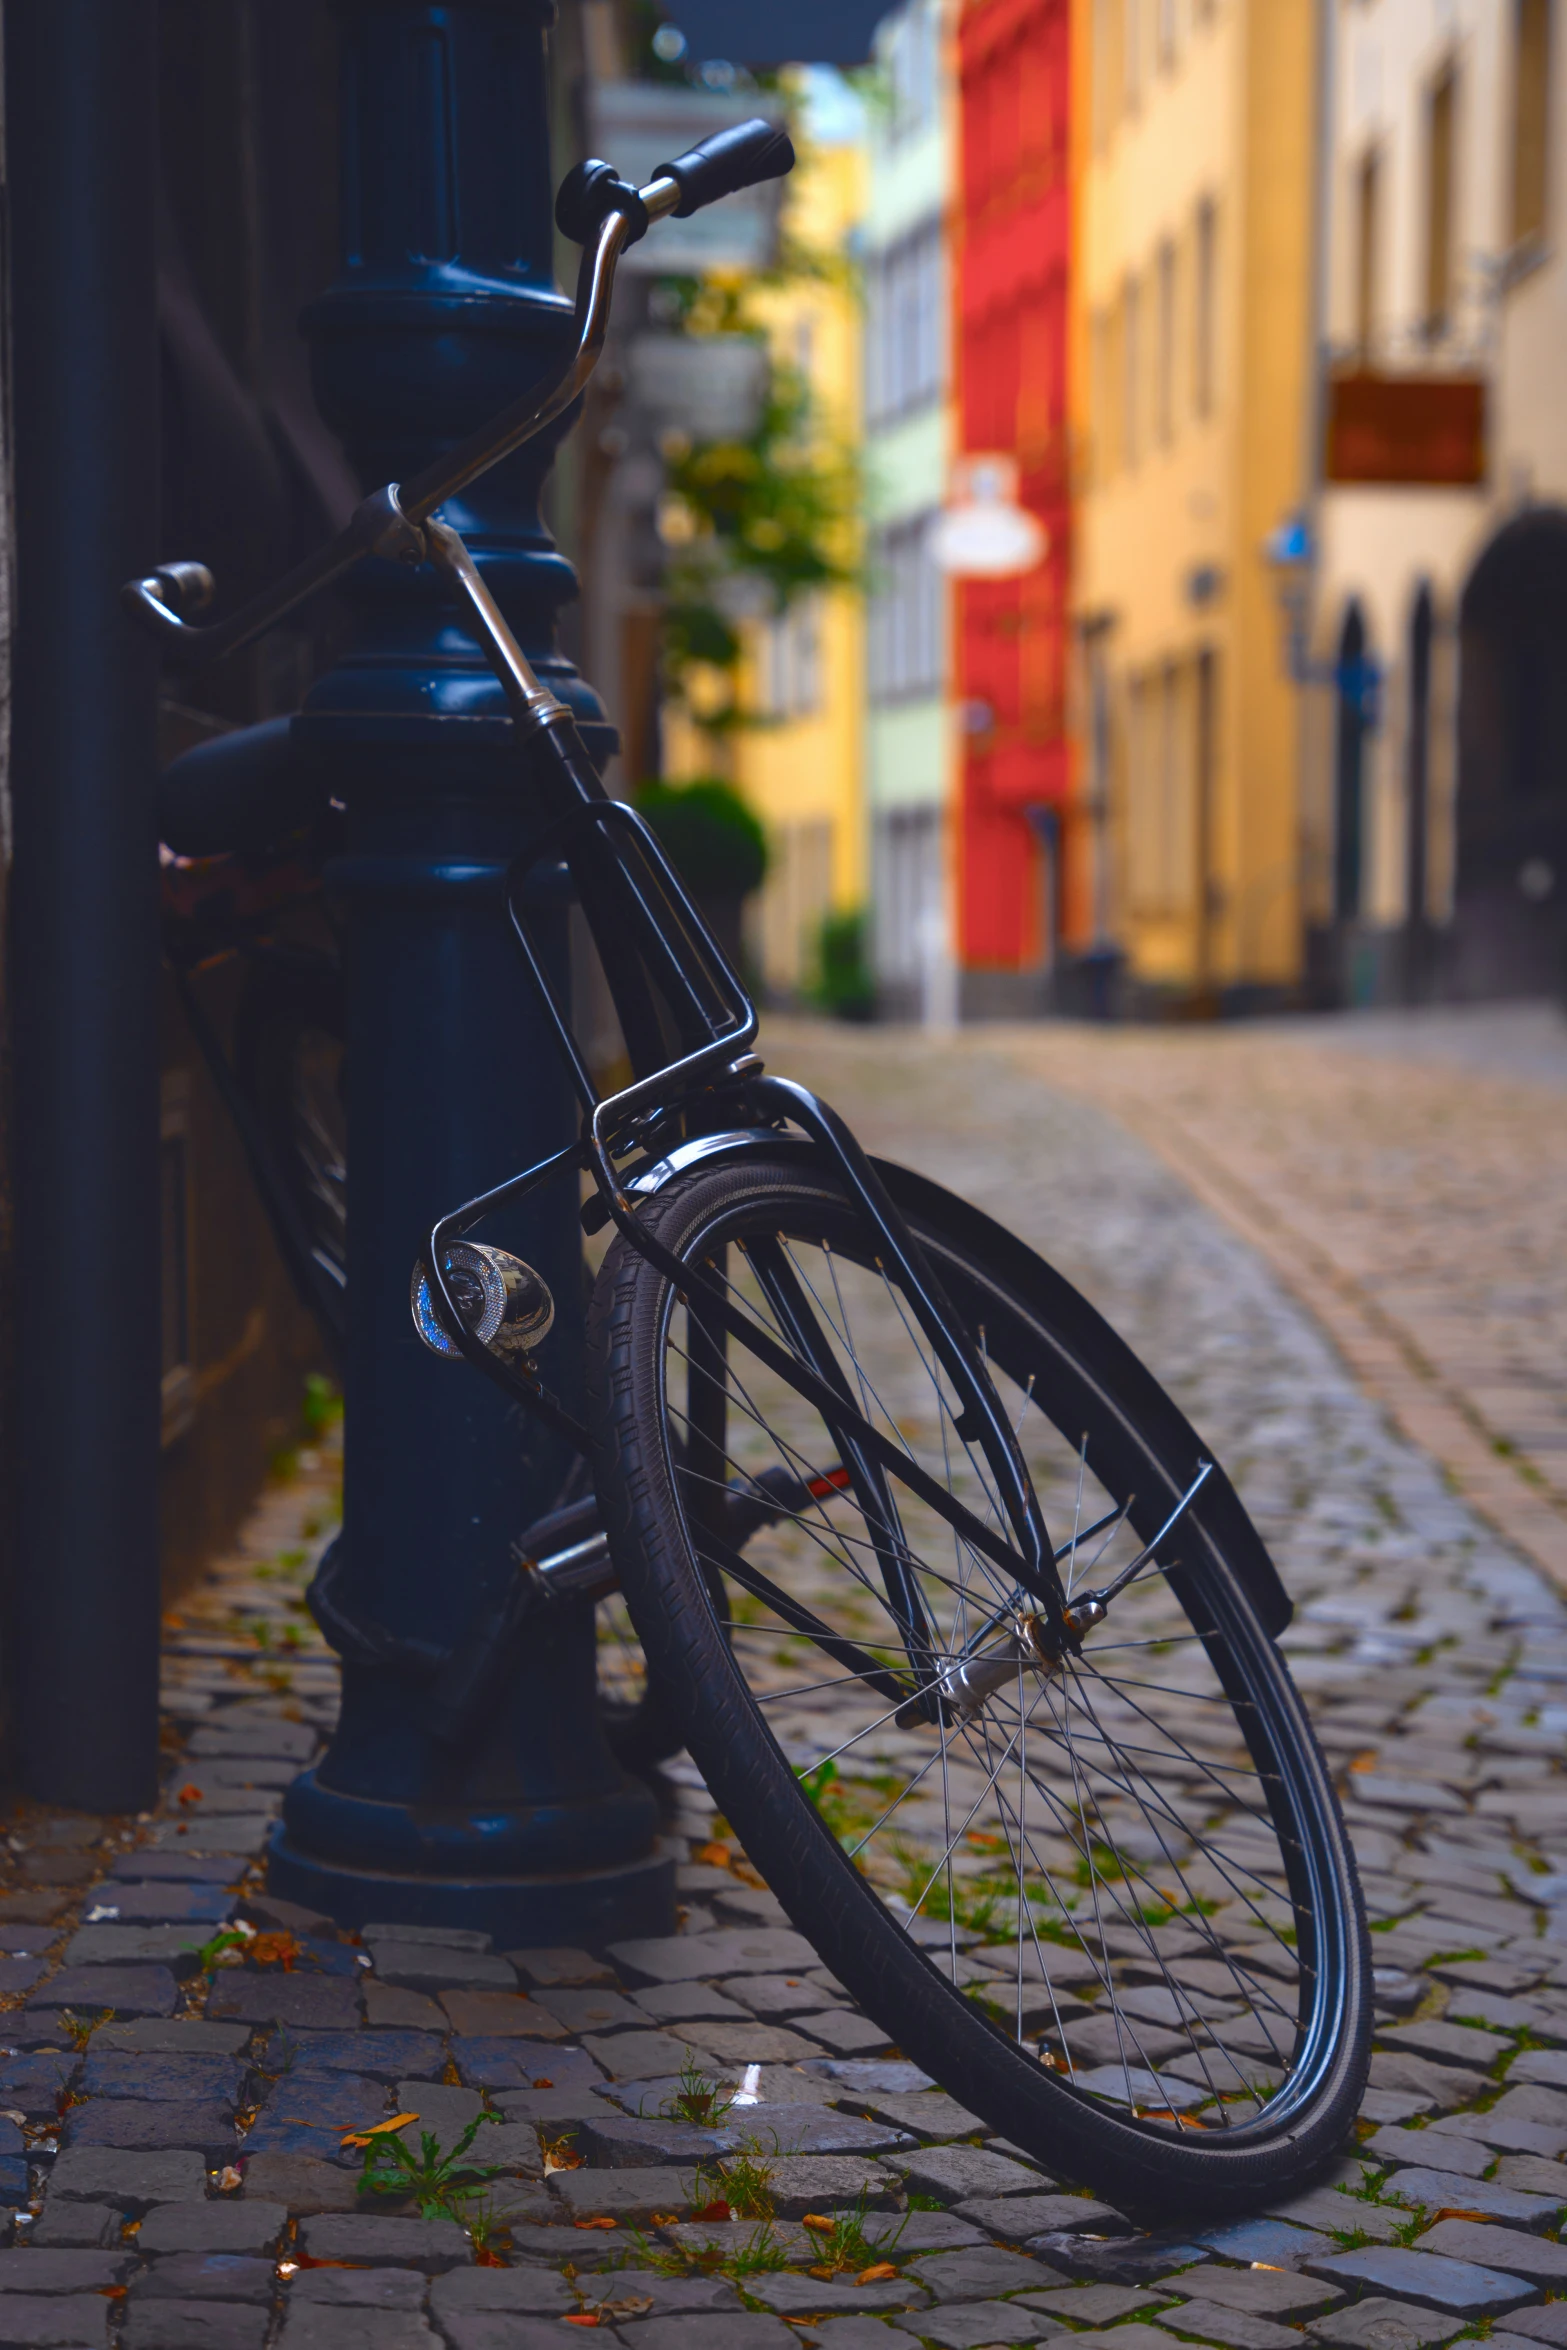 bicycle locked to post on street with buildings in background